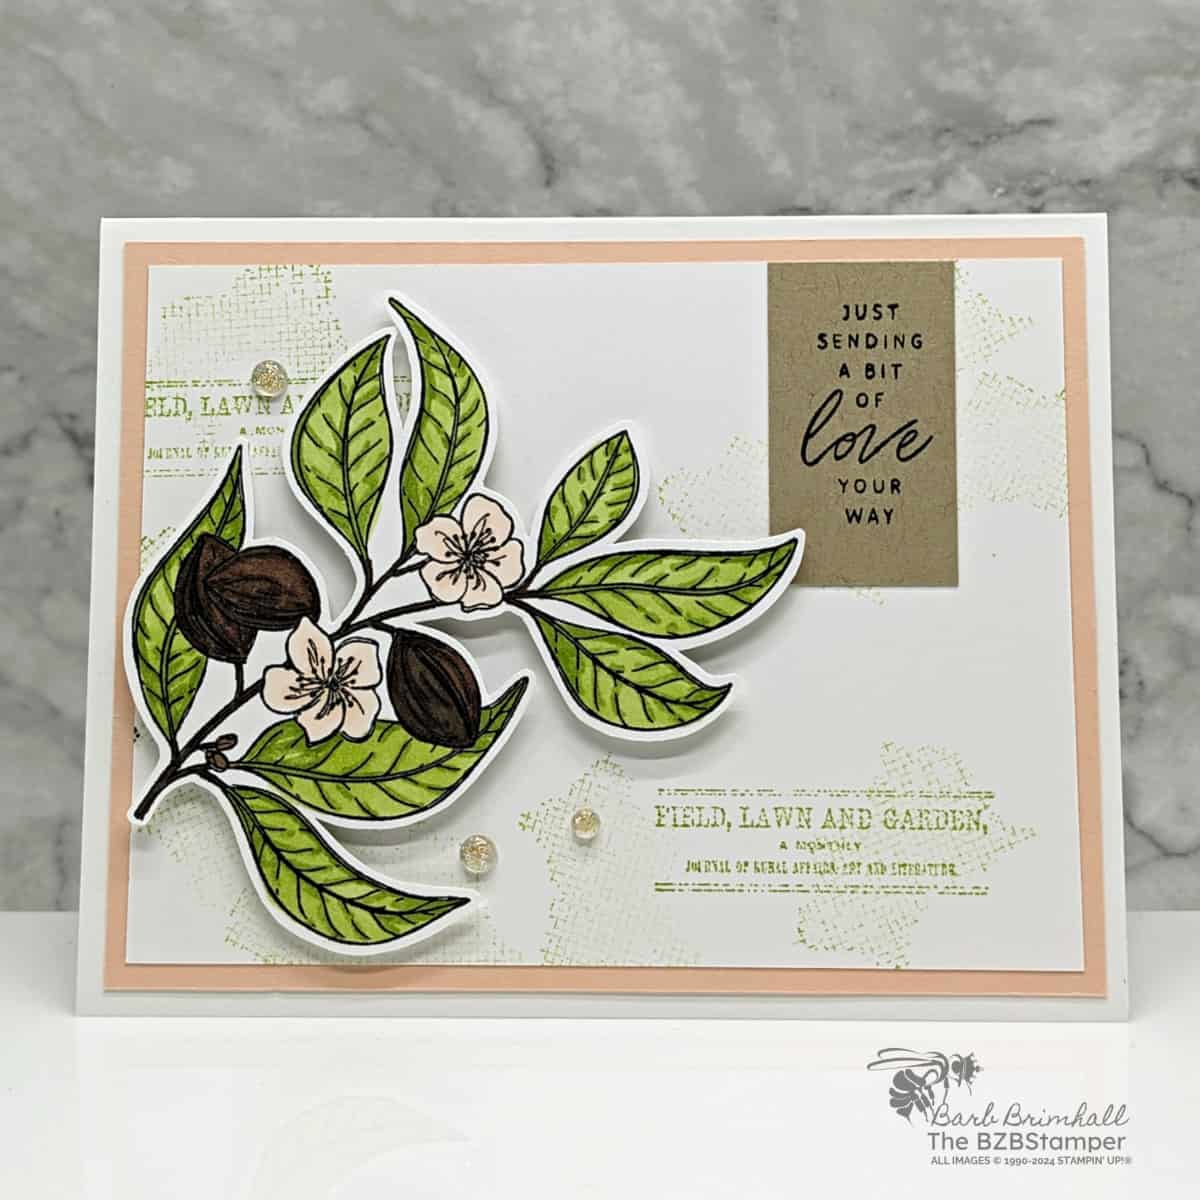 Lovely and Sweet Bundle by Stampin Up in greens, pinks and browns.  Features a die-cut flowers with a collage feel.
